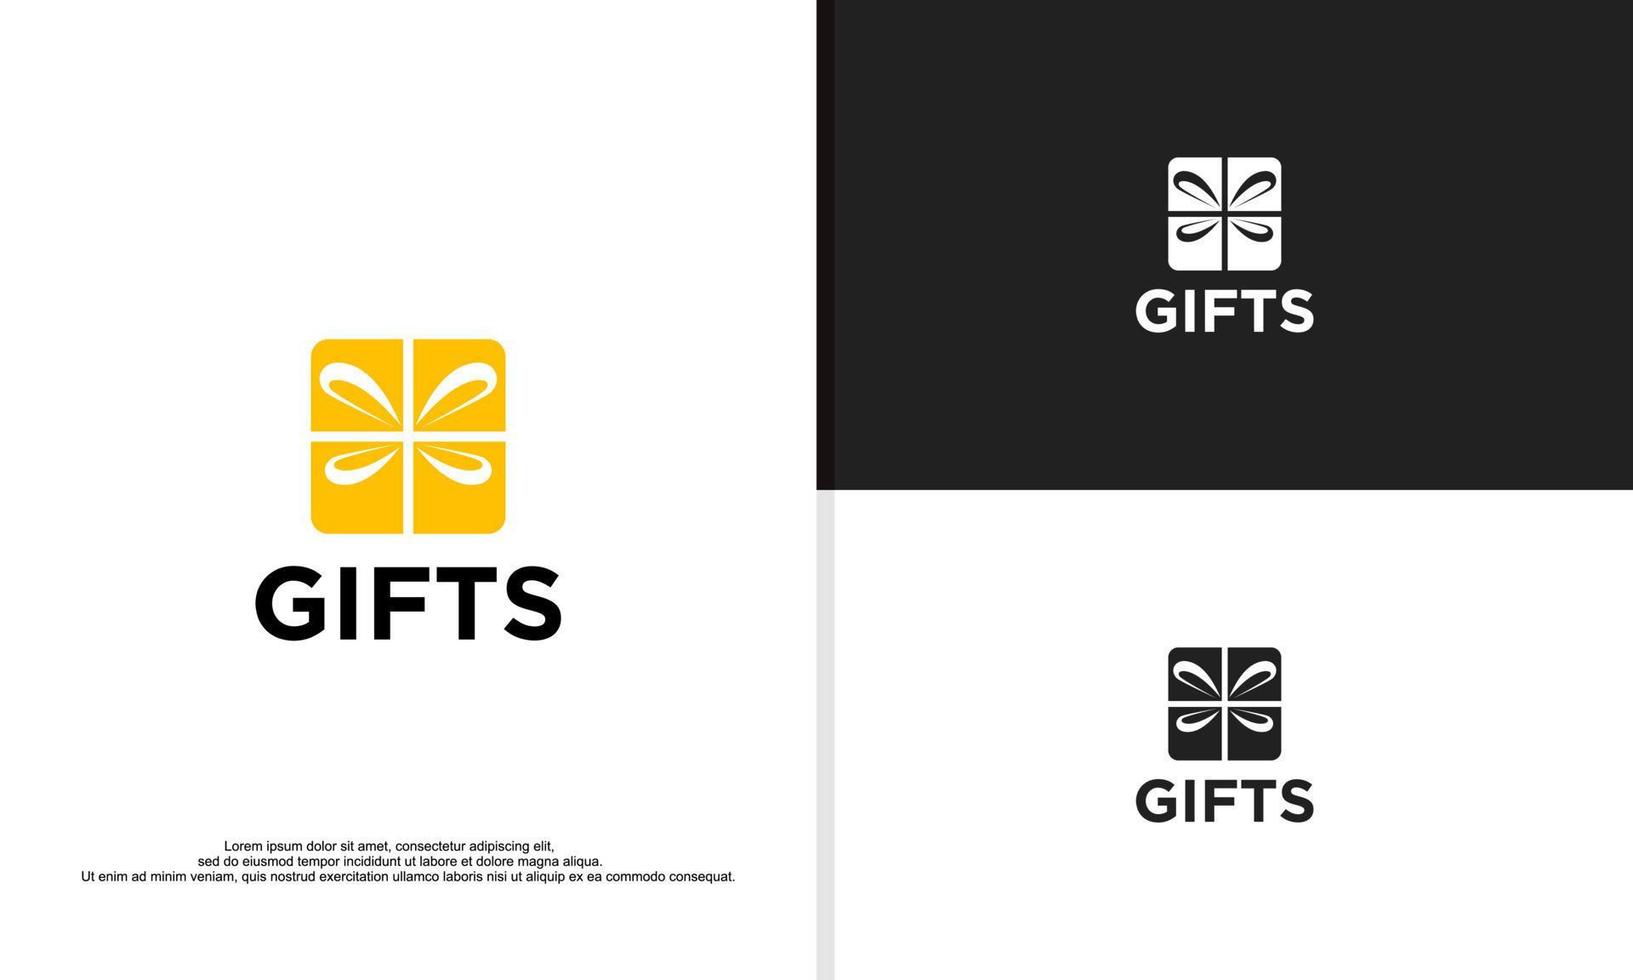 logo illustration vector graphic of simple gift box.